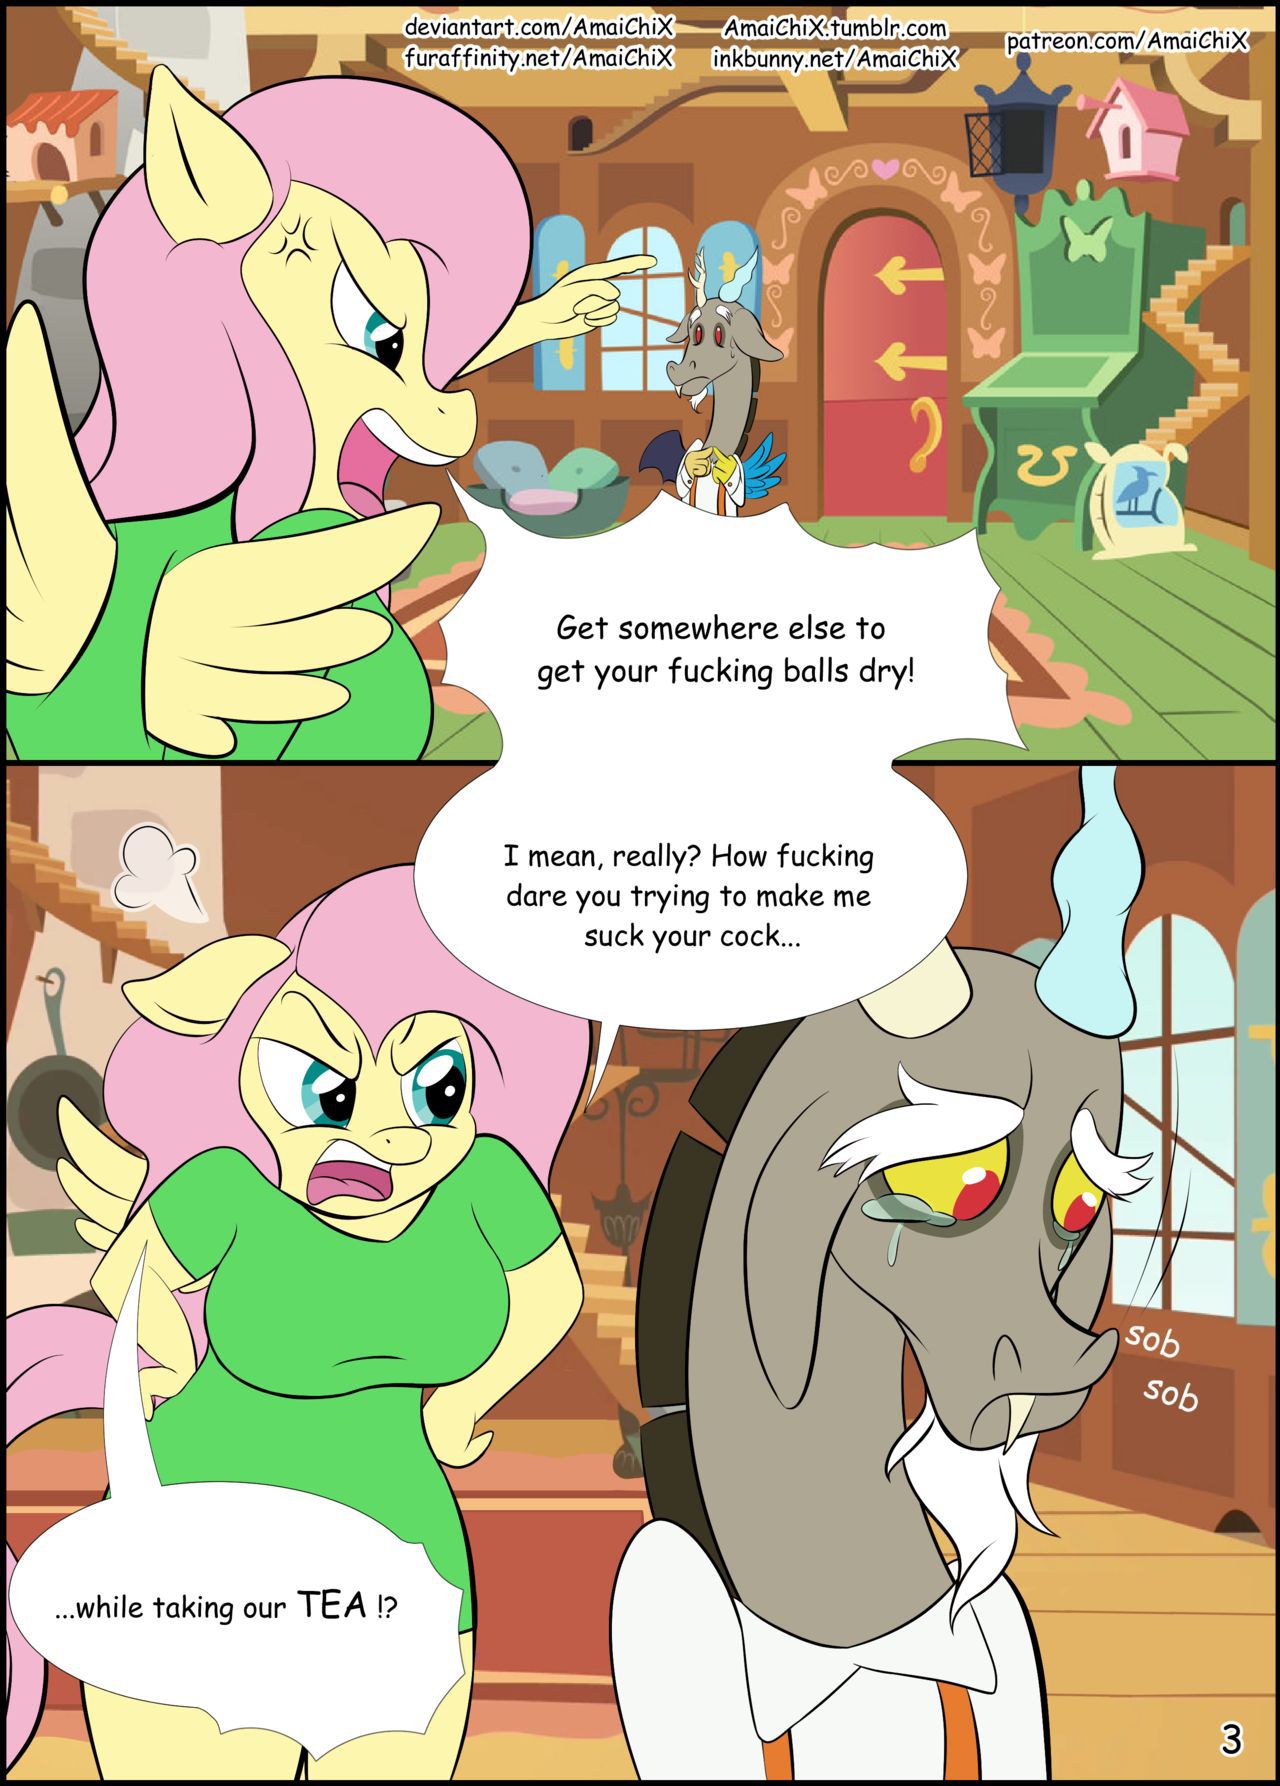 [AmaiChiX] Teat Party (My Little Pony Friendship Is Magic) [Ongoing] 4